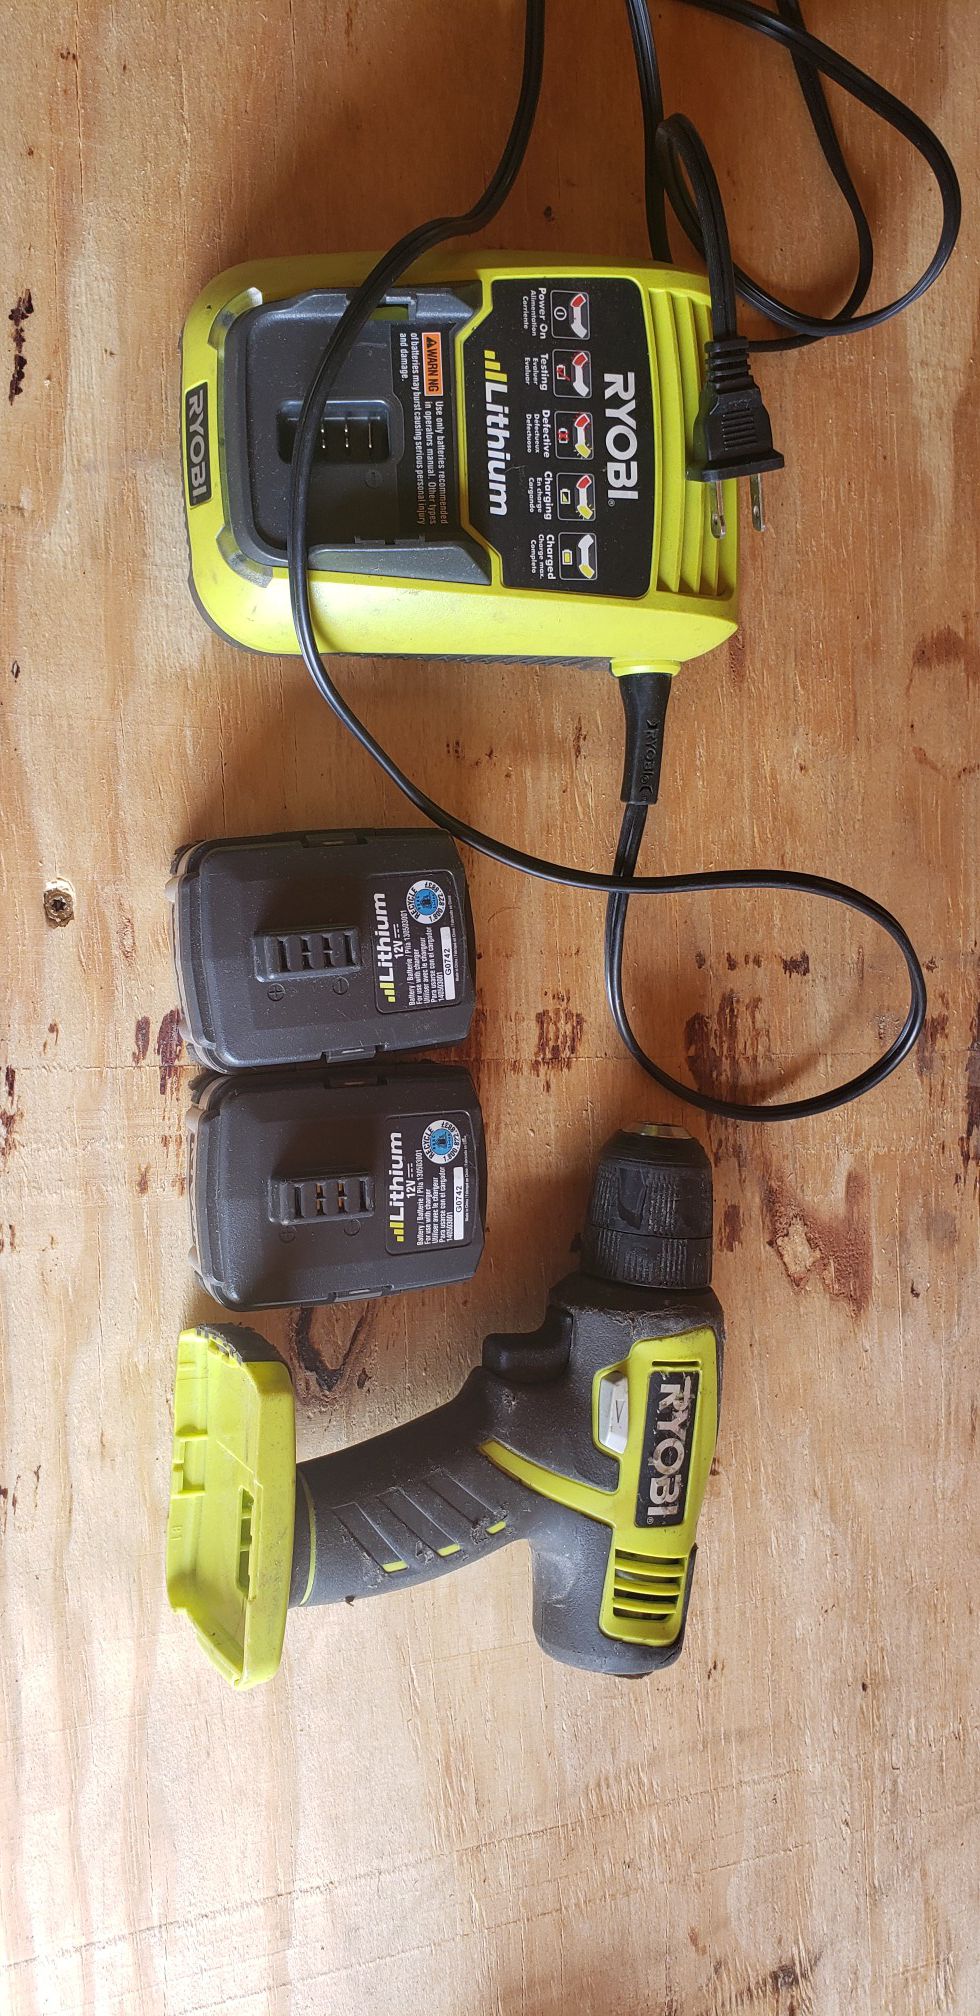 Ryobi 12v drill, charger and 2 batteries